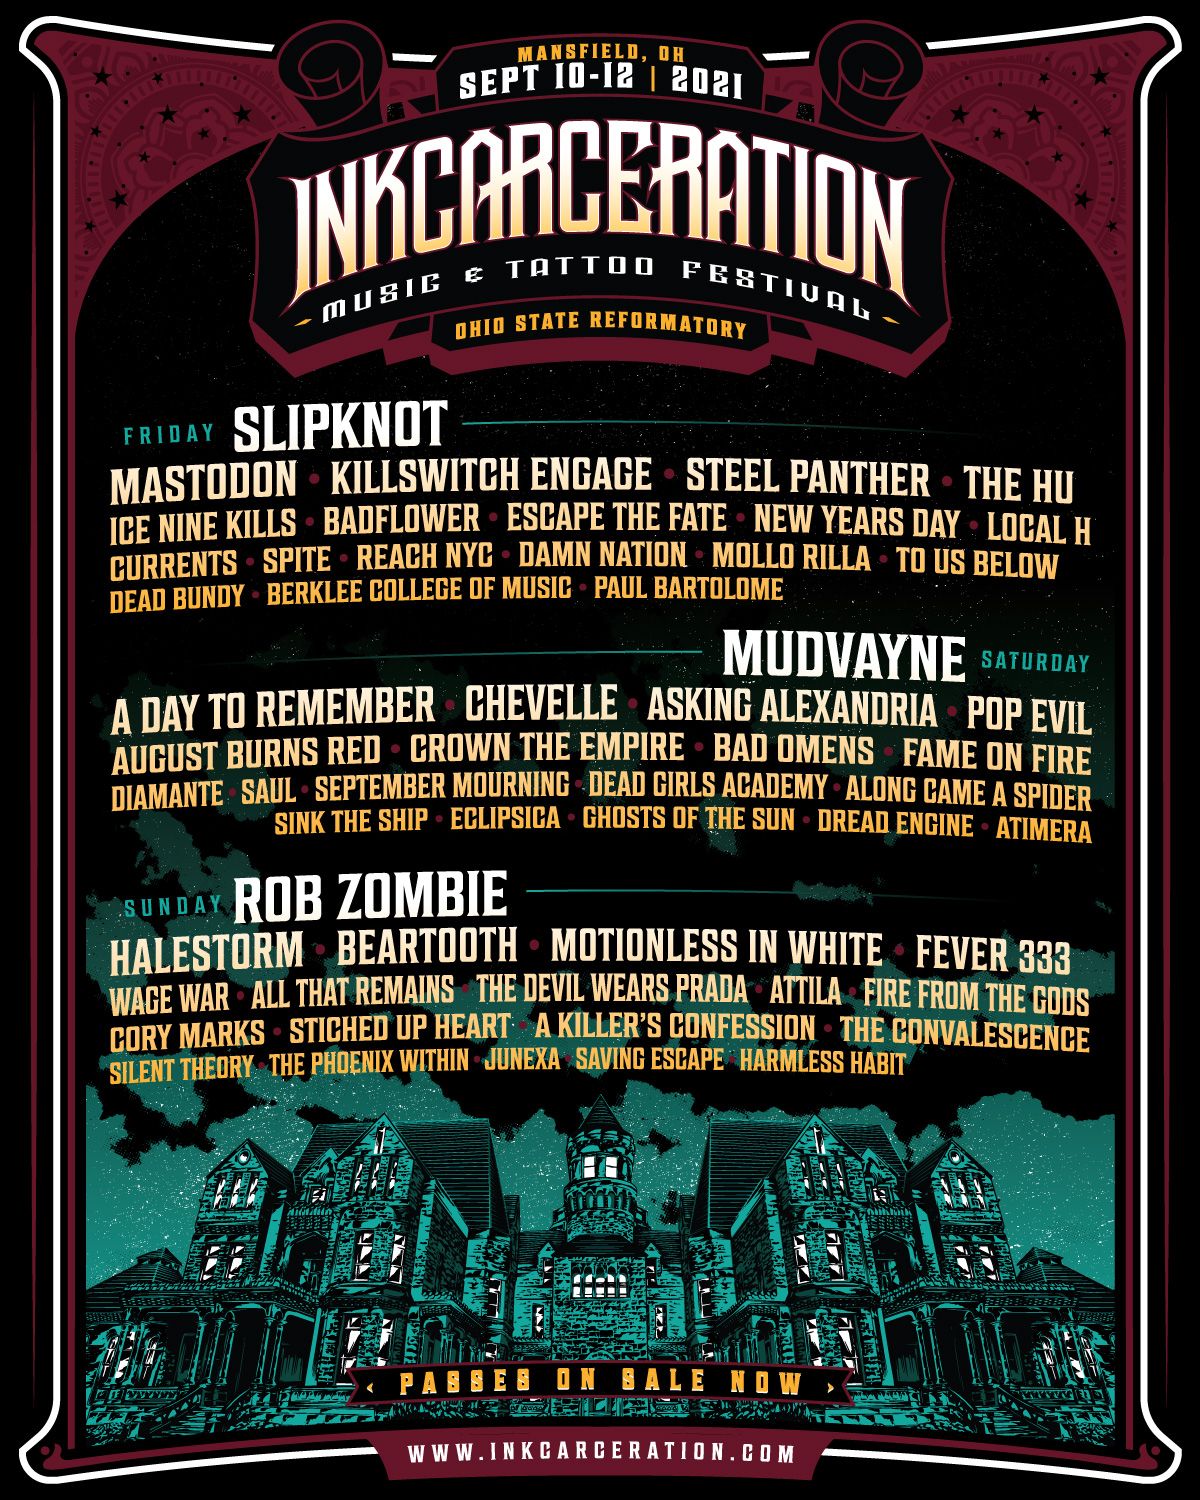 Inkcarceration Music Tattoo Festival Slipknot Rob Zombie Mudvayne First Reunion Show More Sept 10 12 At Historic Ohio State Reformatory With More Than 75 Tattoo Artists Celebrity Land International - slipknot song roblox